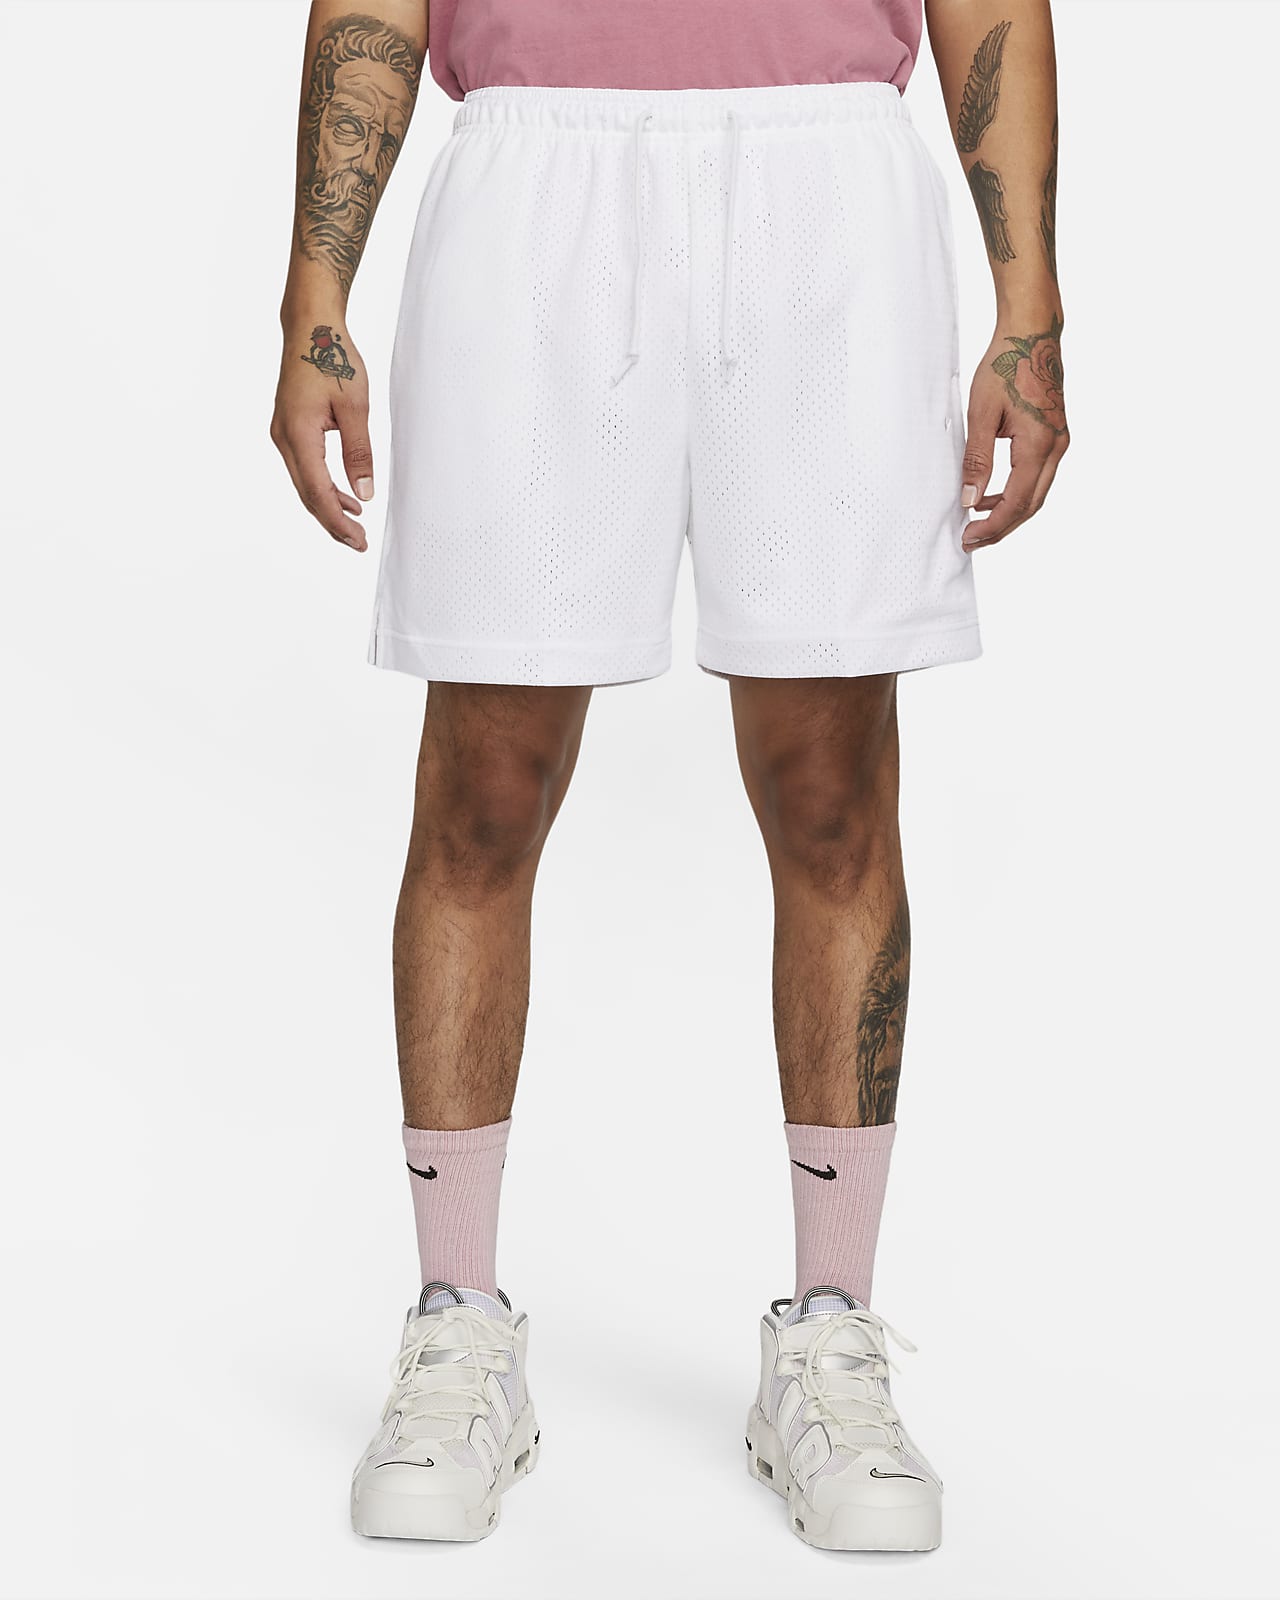 The Best Men's Training Shorts by Nike to Shop Now. Nike.com